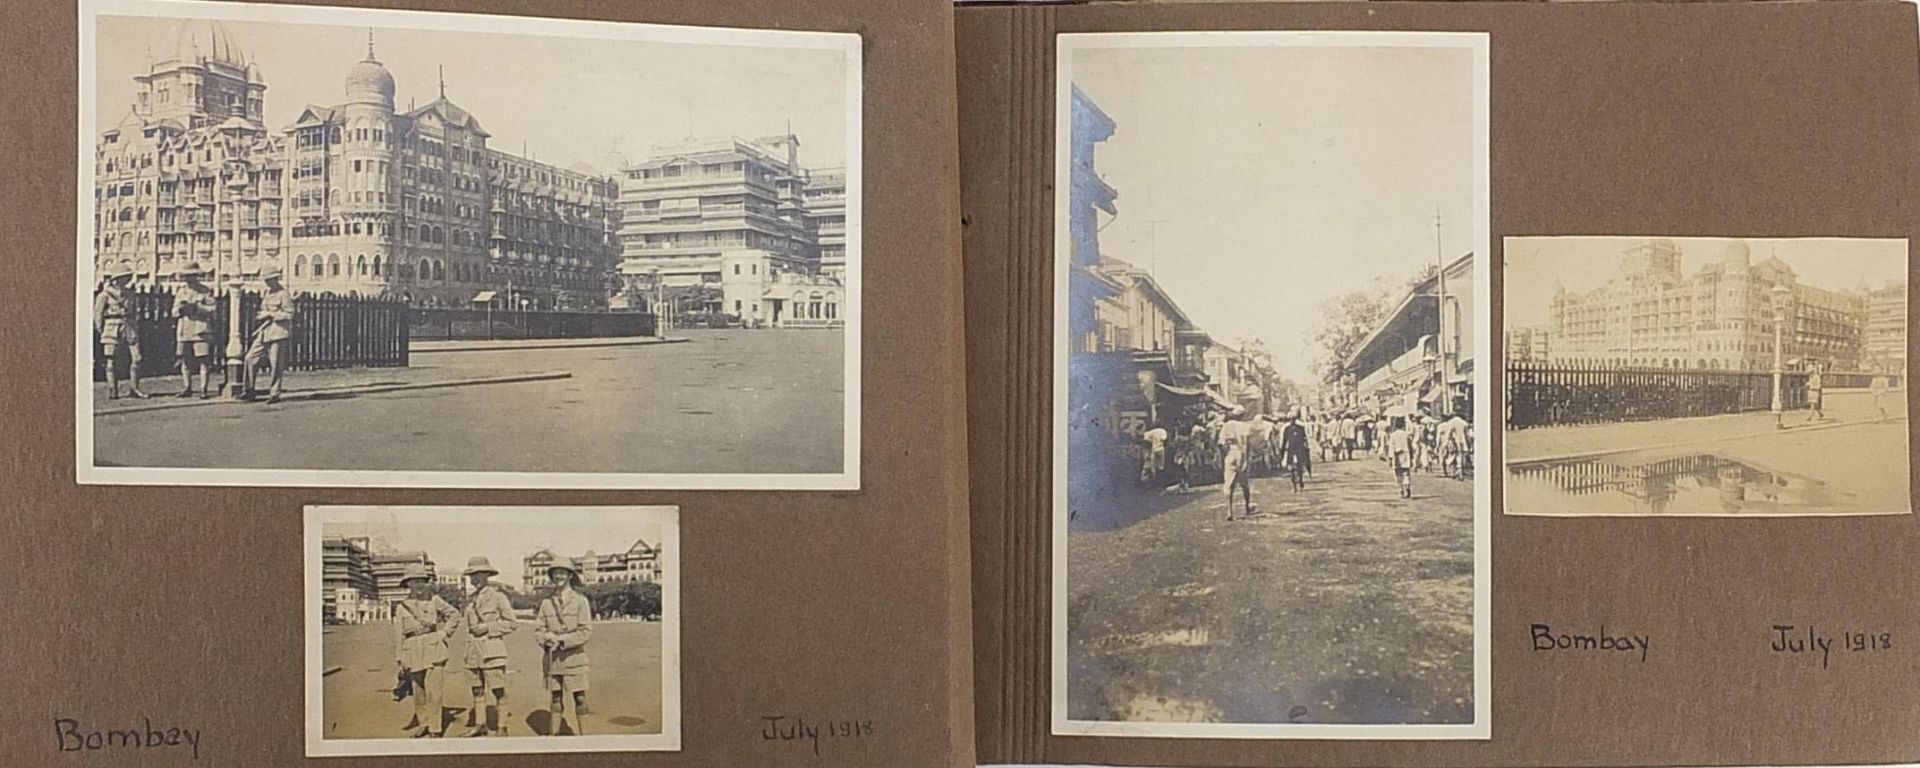 Military interest photograph album relating to the Lancashire Fusiliers including Cape Town and - Image 3 of 6